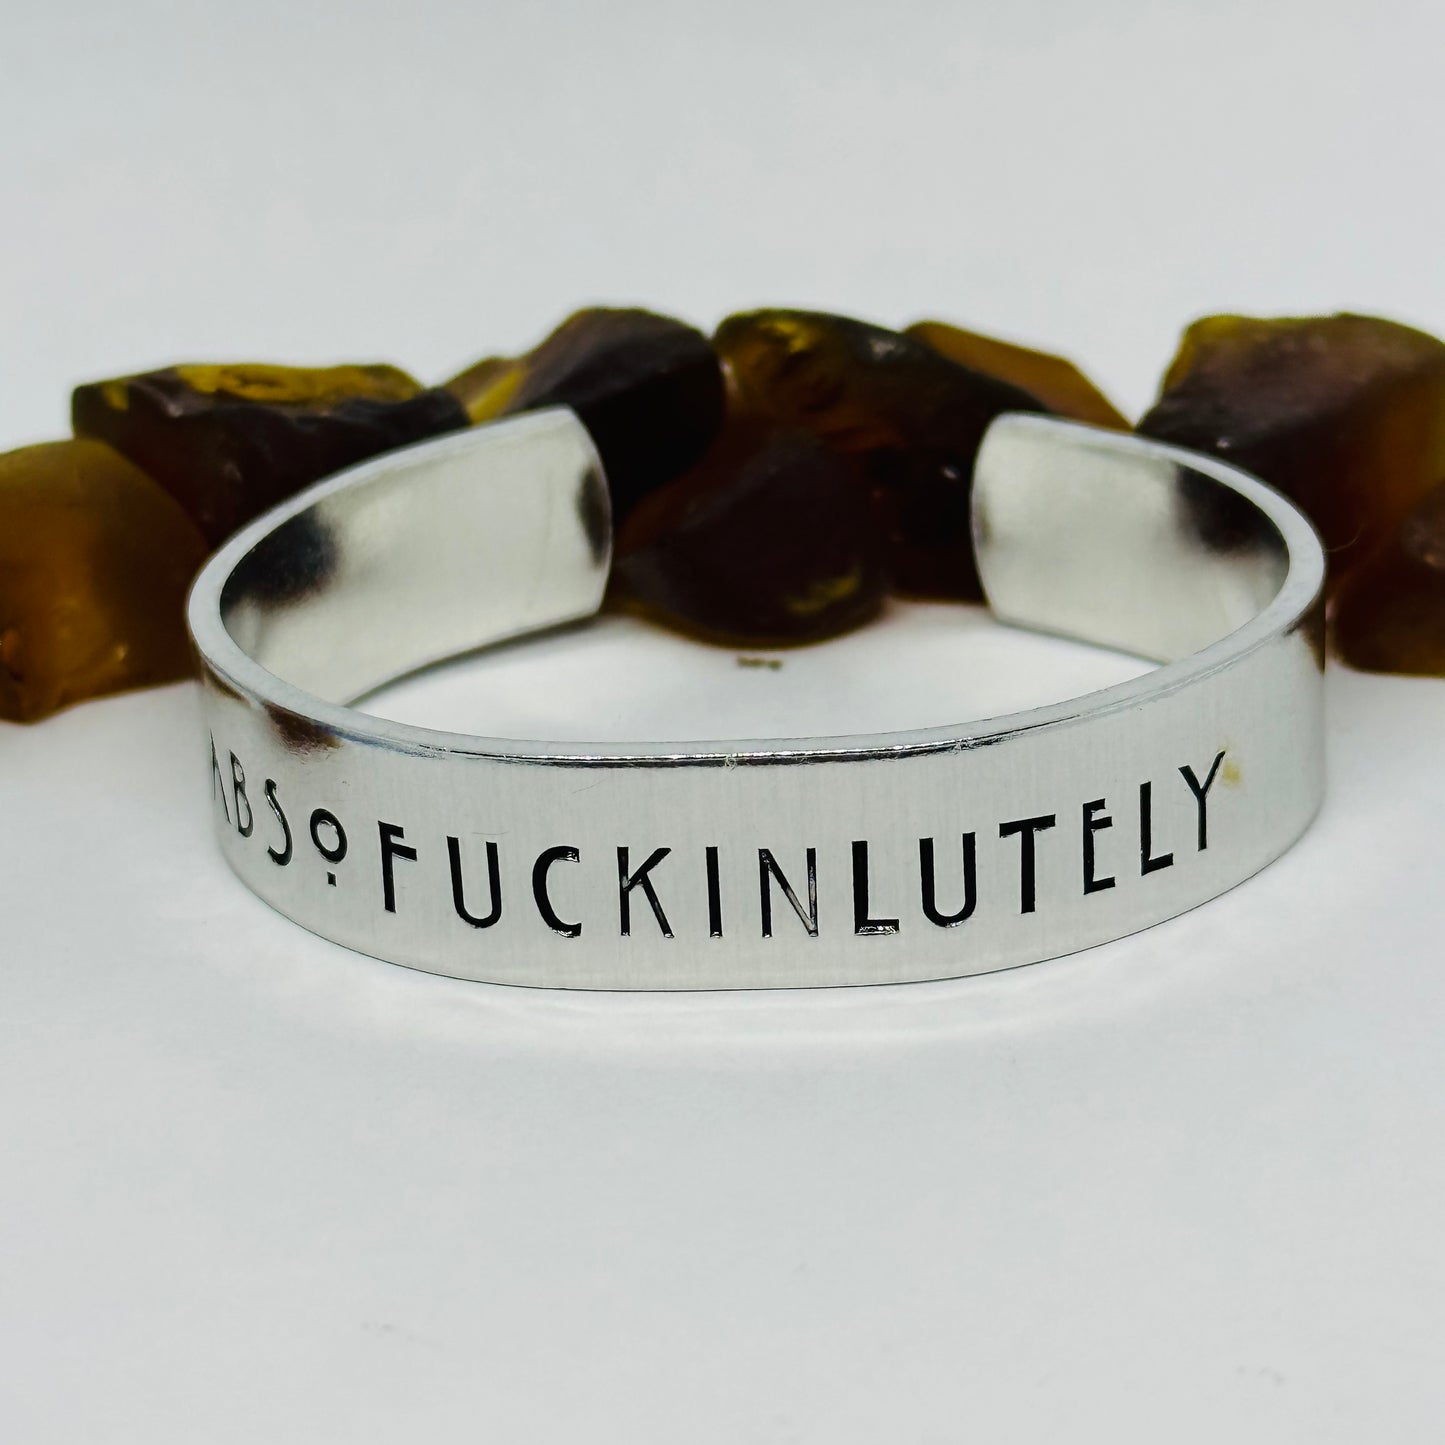 Absofuckinlutely Hand Stamped Cuff Bracelet | Adult Theme